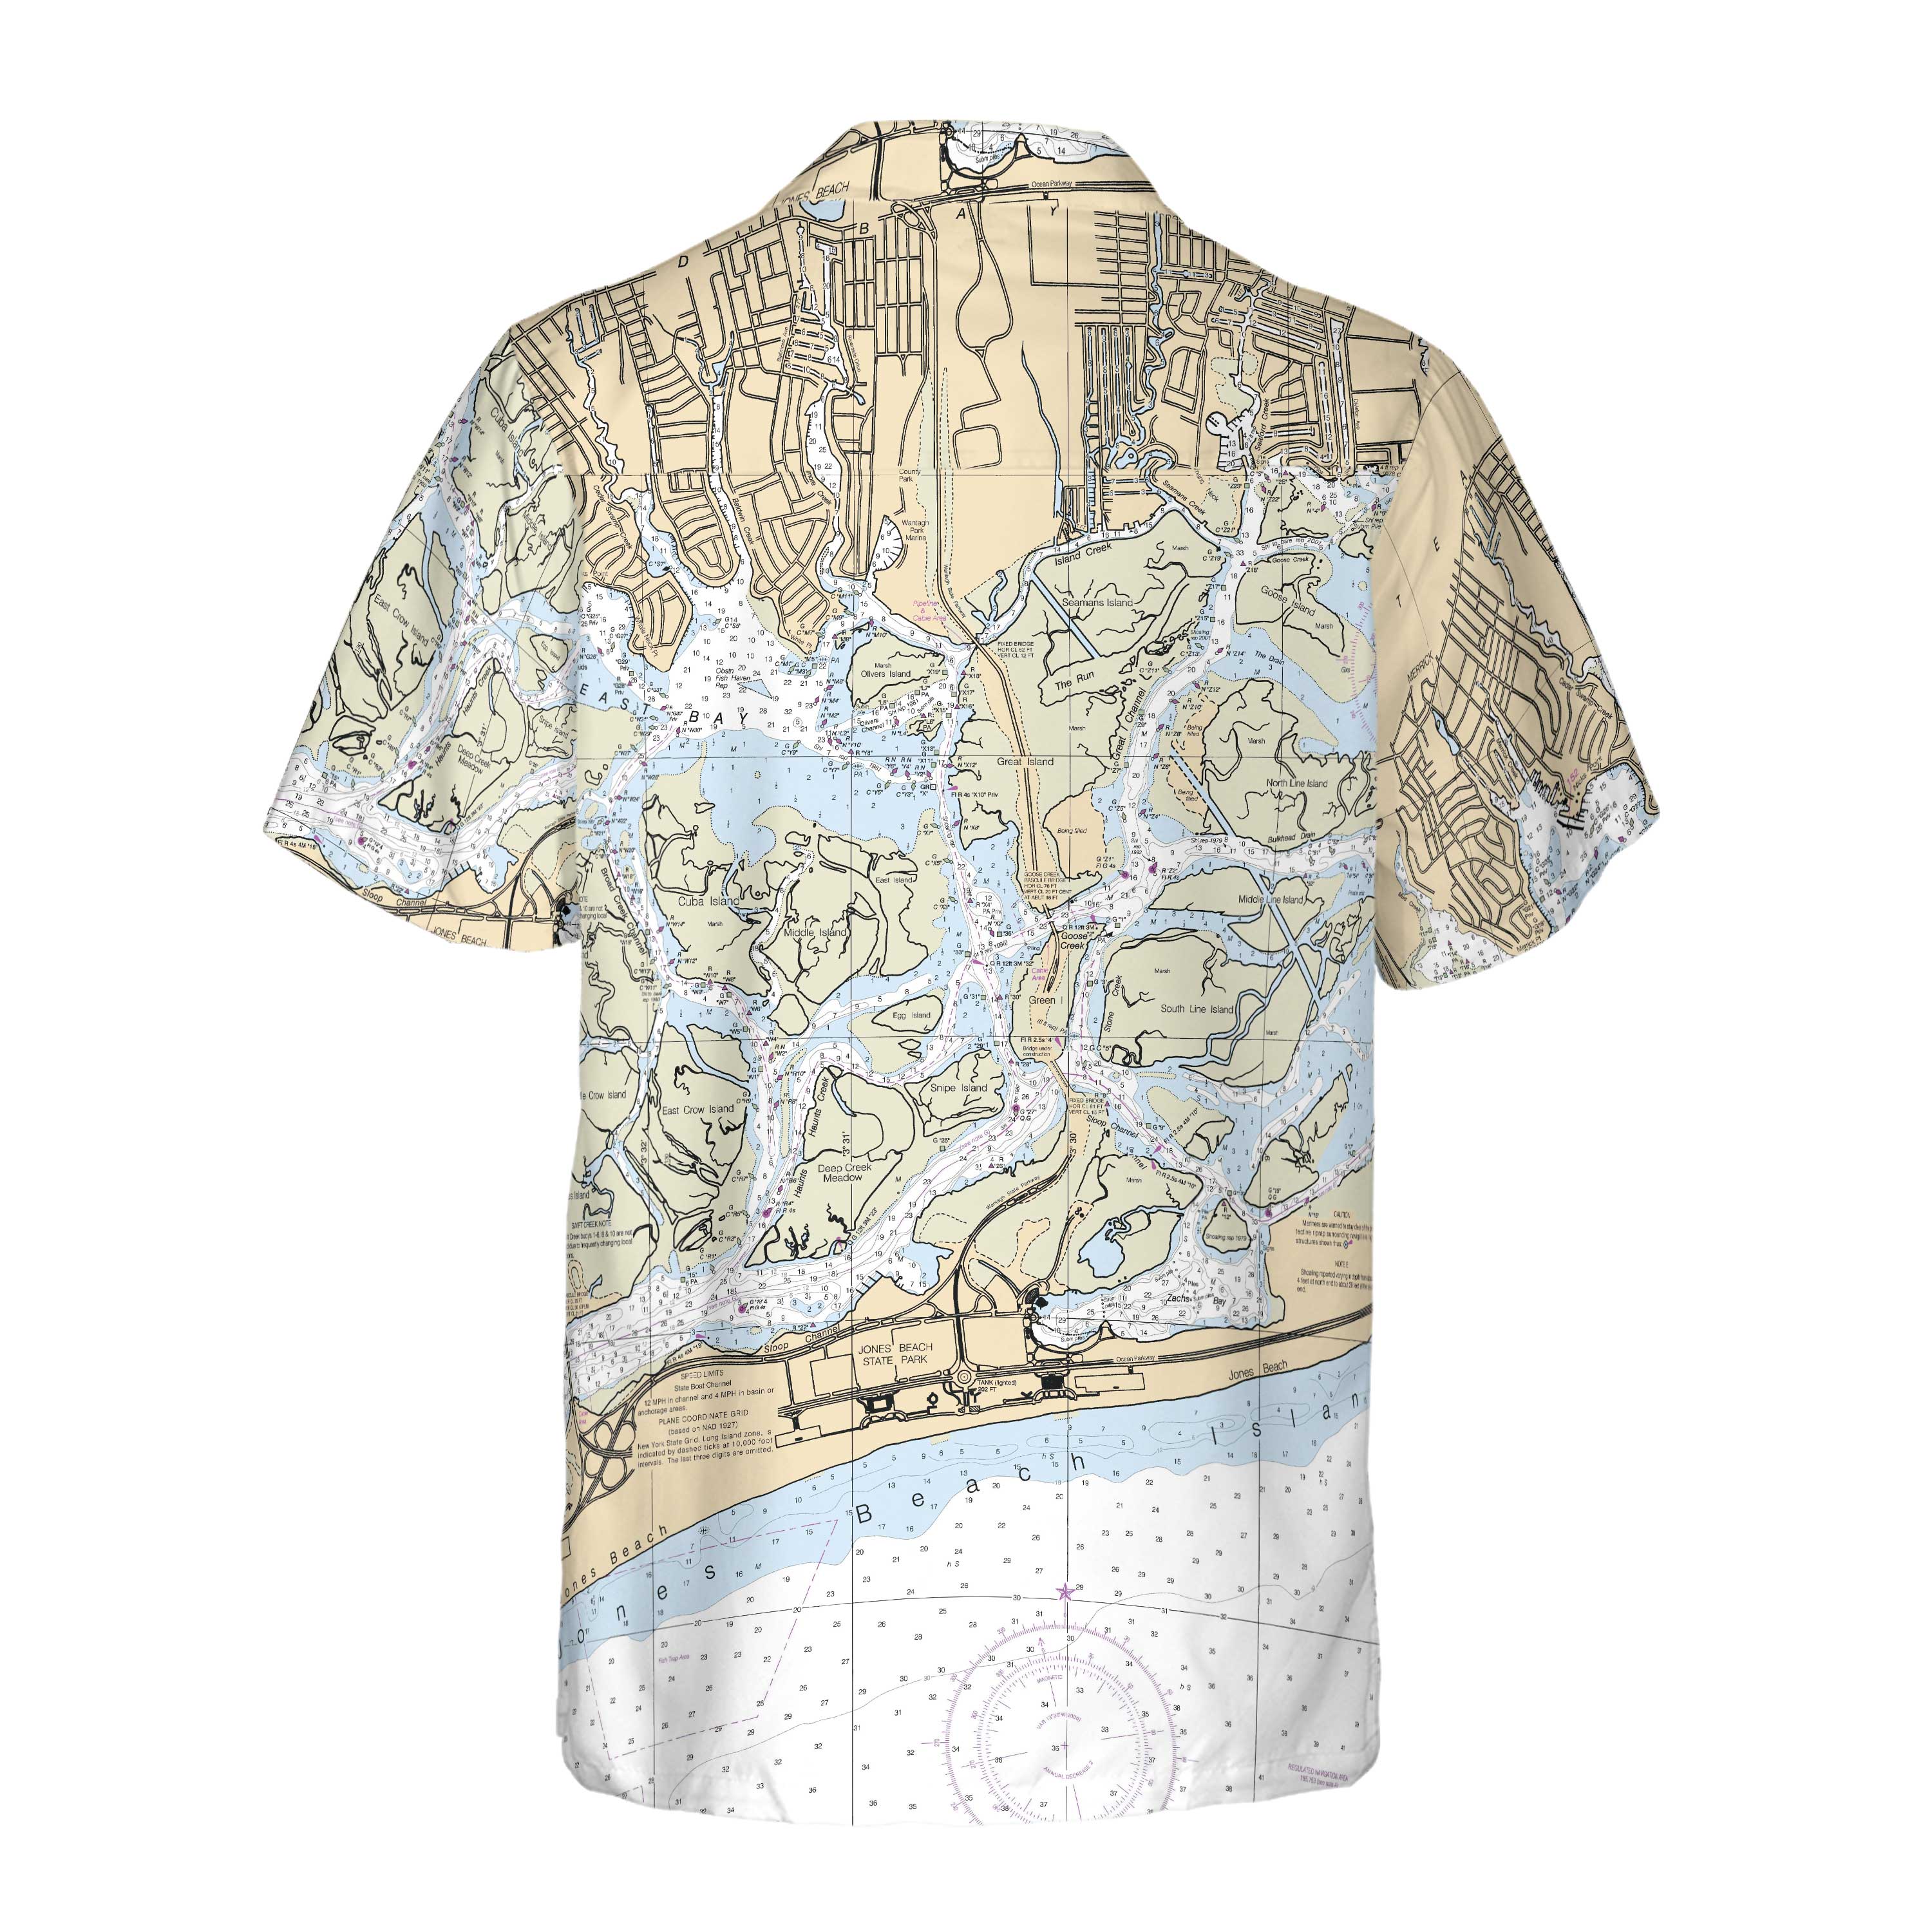 The Freeport Long Island Coconut Button Camp Shirt